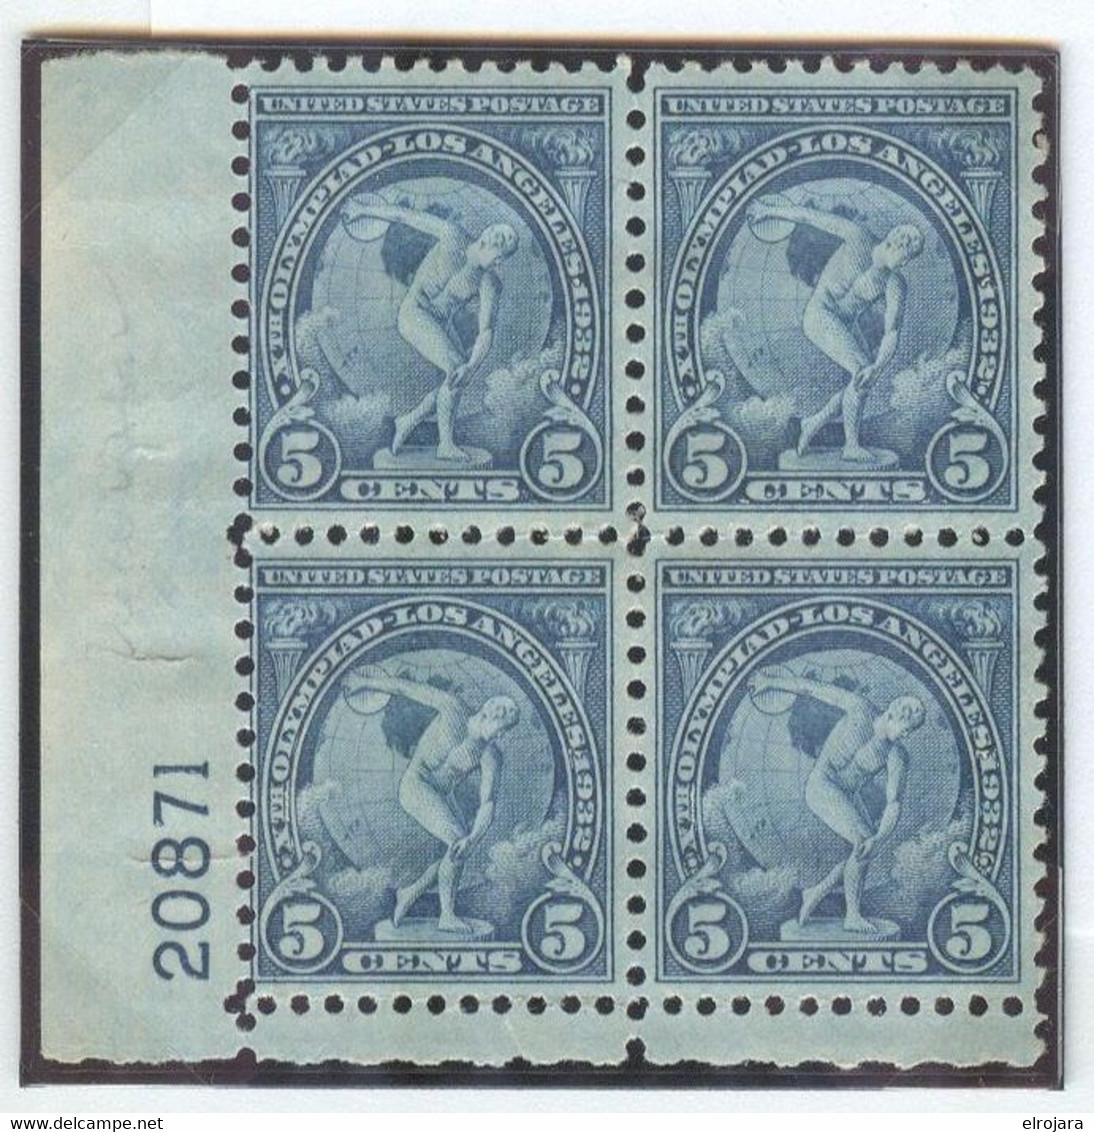 USA Plateblock 5c Discus MNH Plate Number 20871 - Sommer 1932: Los Angeles